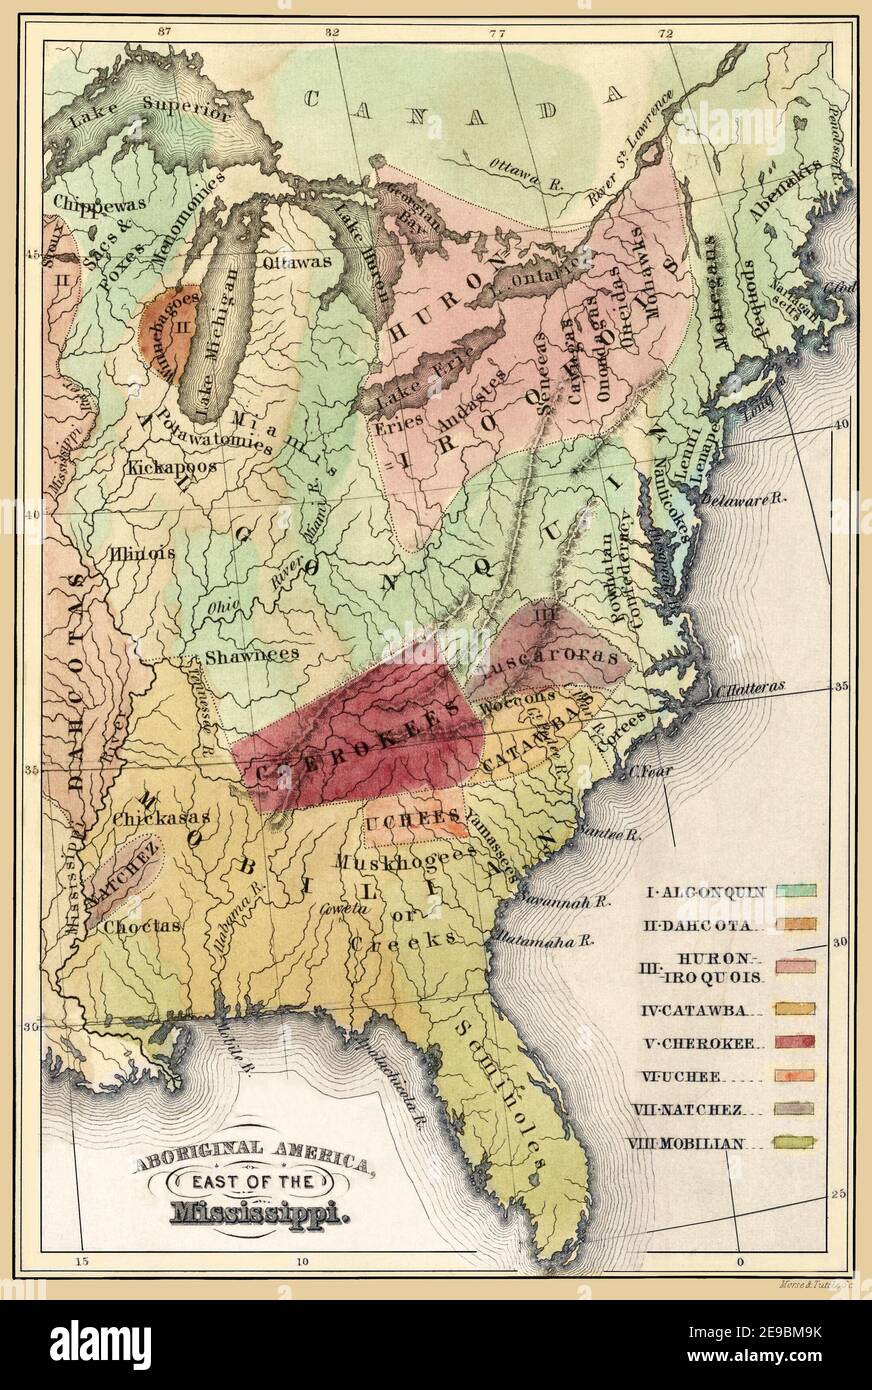 Indian Tribal Lands in US Eastern States Circa 1600 Old Map. Original title: 'Aboriginal America east of the Mississippi.' This is an enhanced, restored reproduction of an old map showing lands of various Indian tribes as of approximately 1600. Map published in the 1840s. Key for locations of Indian tribes. Stock Photo